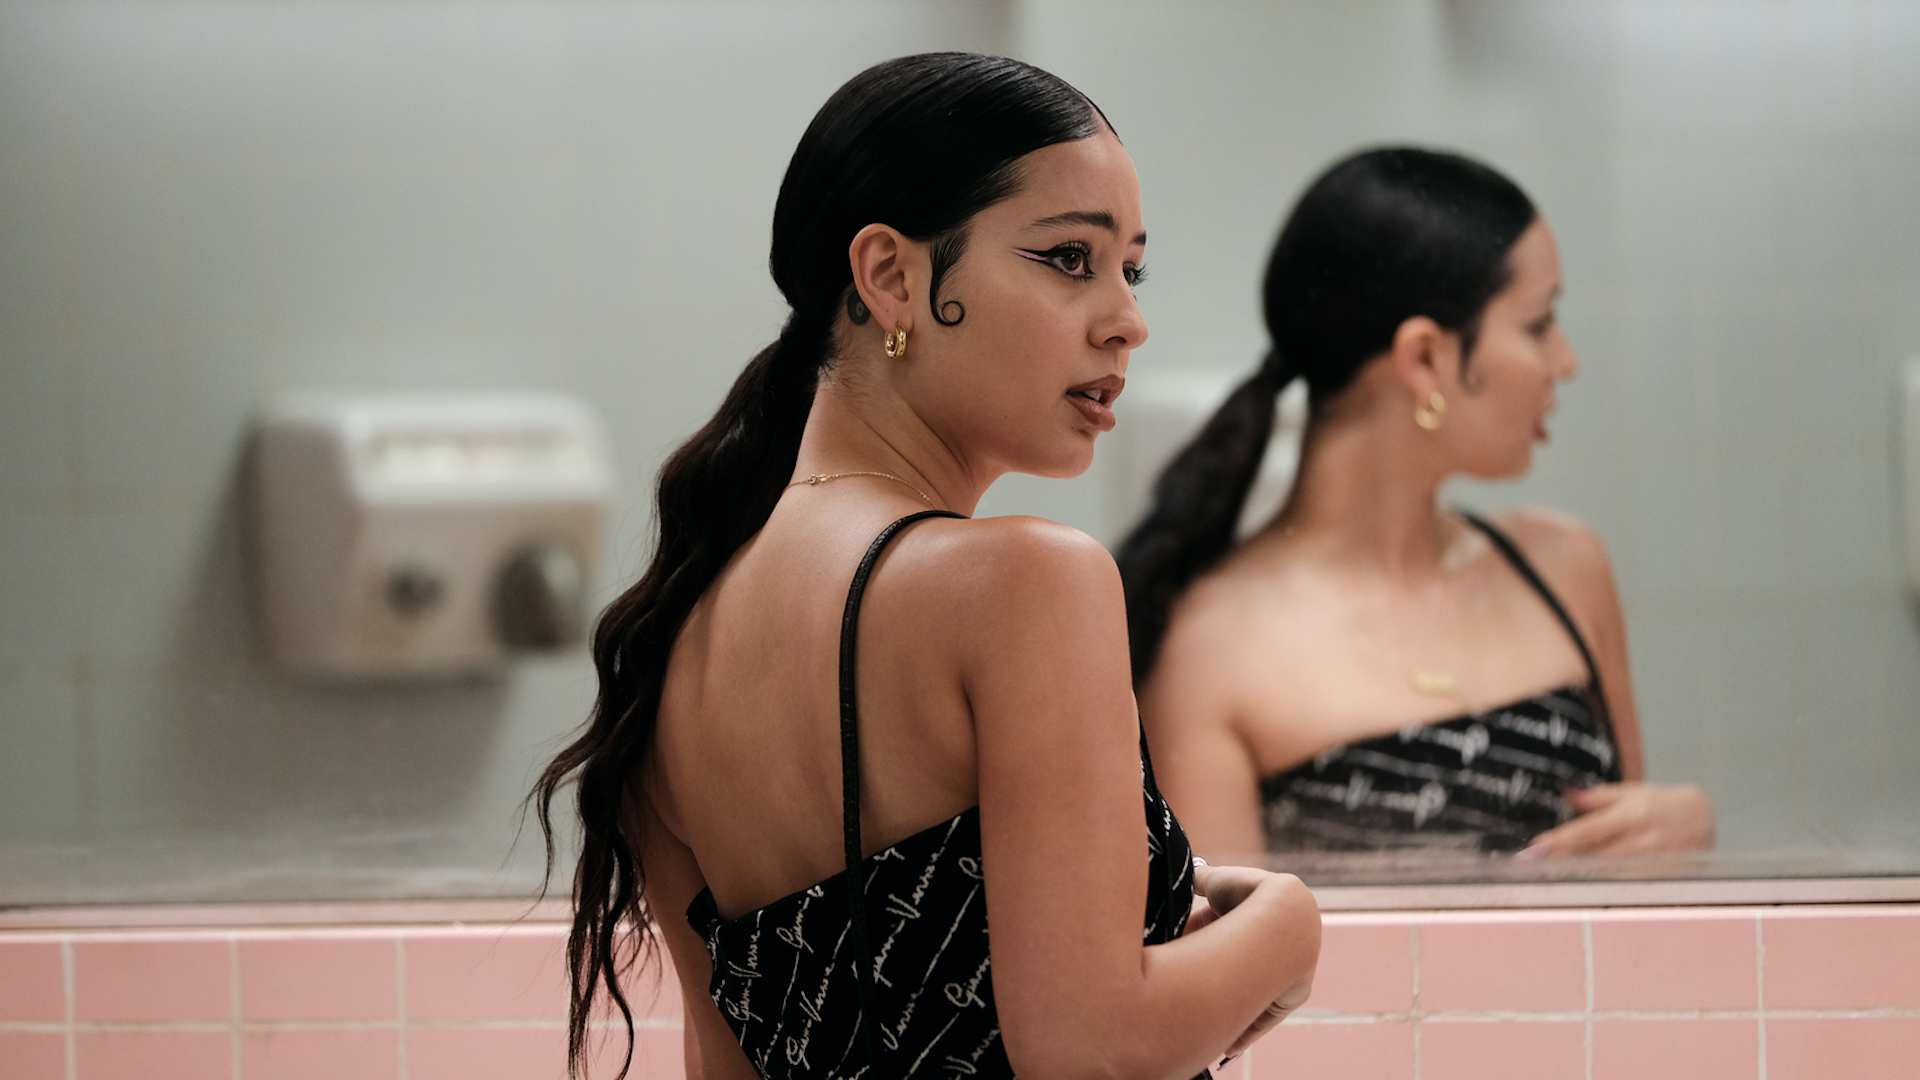 maddy from euphoria in the girls' room in season 2